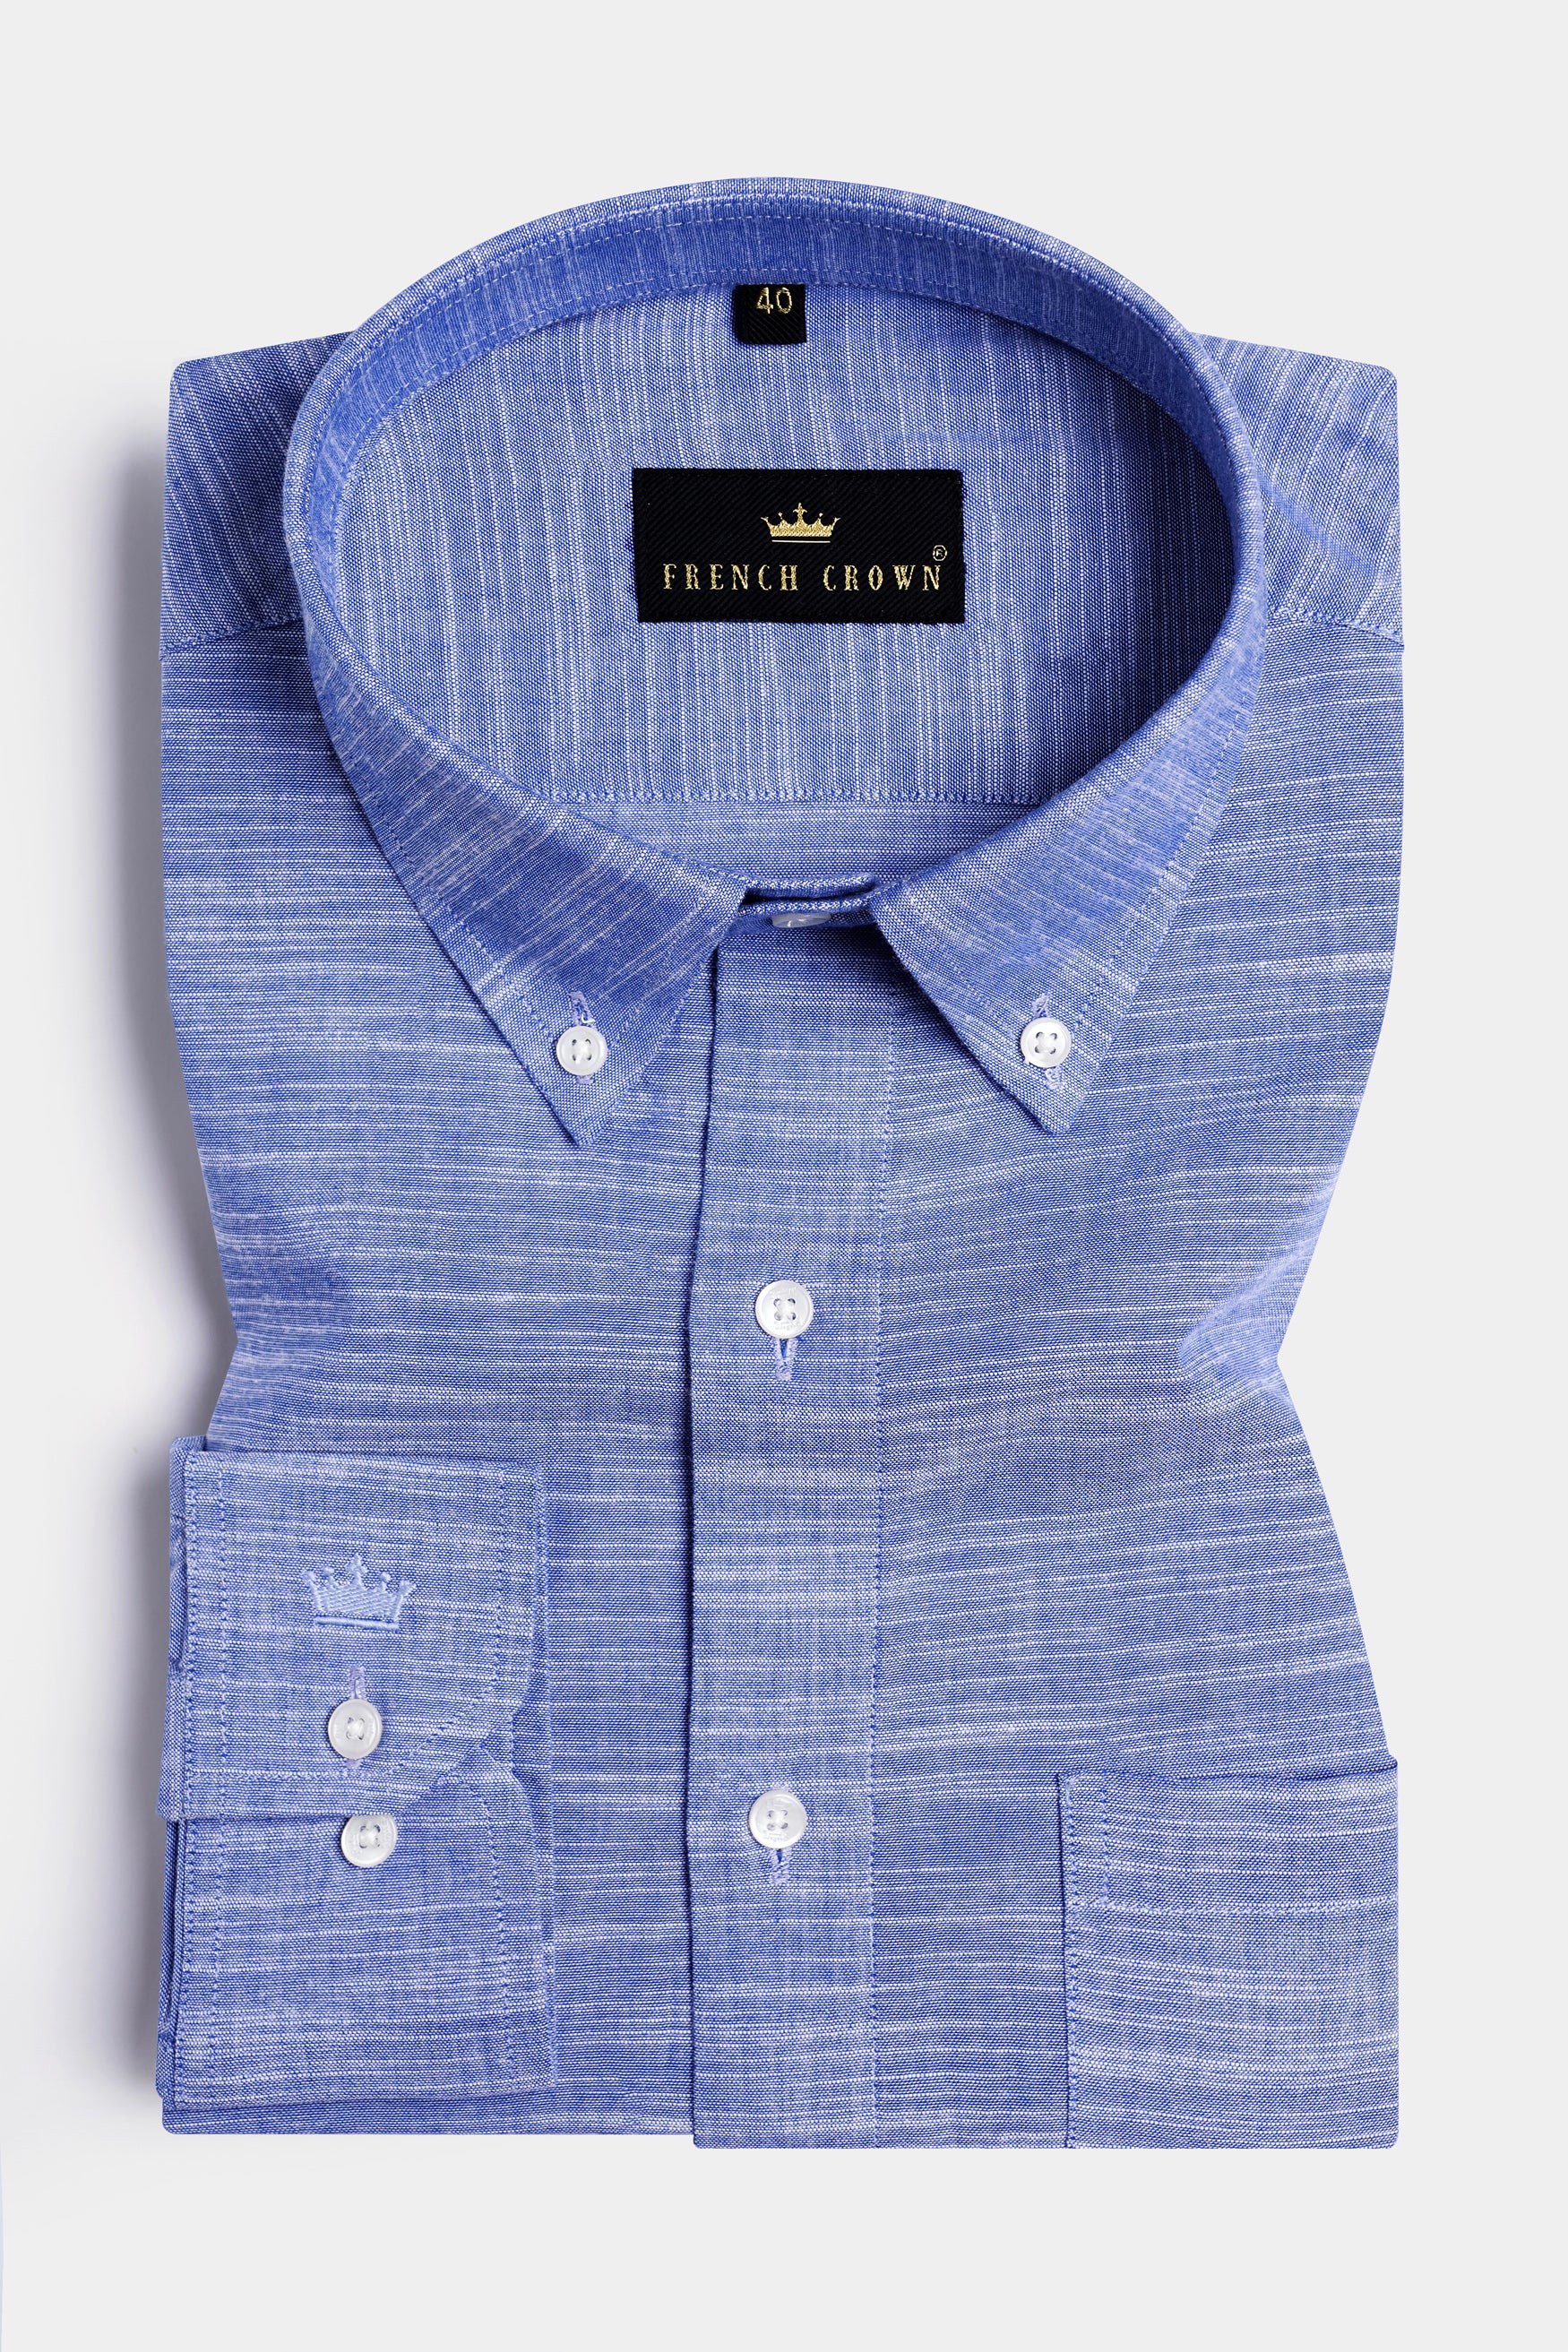 Faded Blue and Black Embroidered Luxurious Linen Designer Shirt